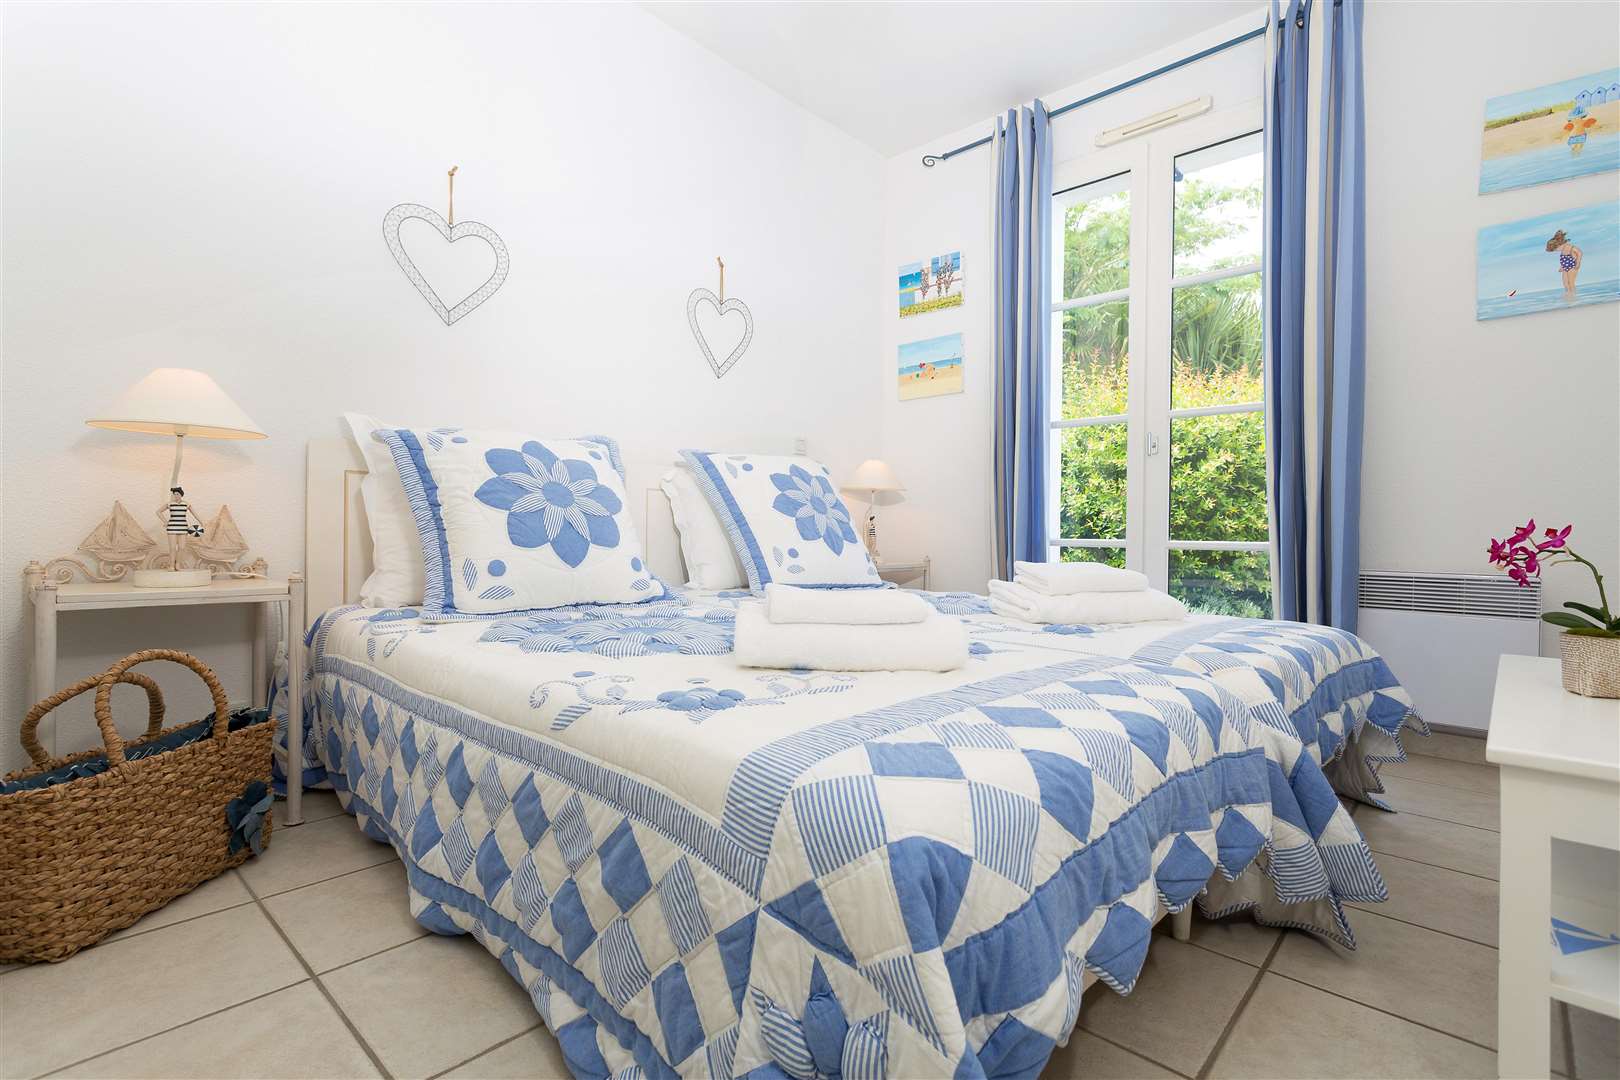 The villas at Les Domaines de Vertmarines can sleep four to eight people